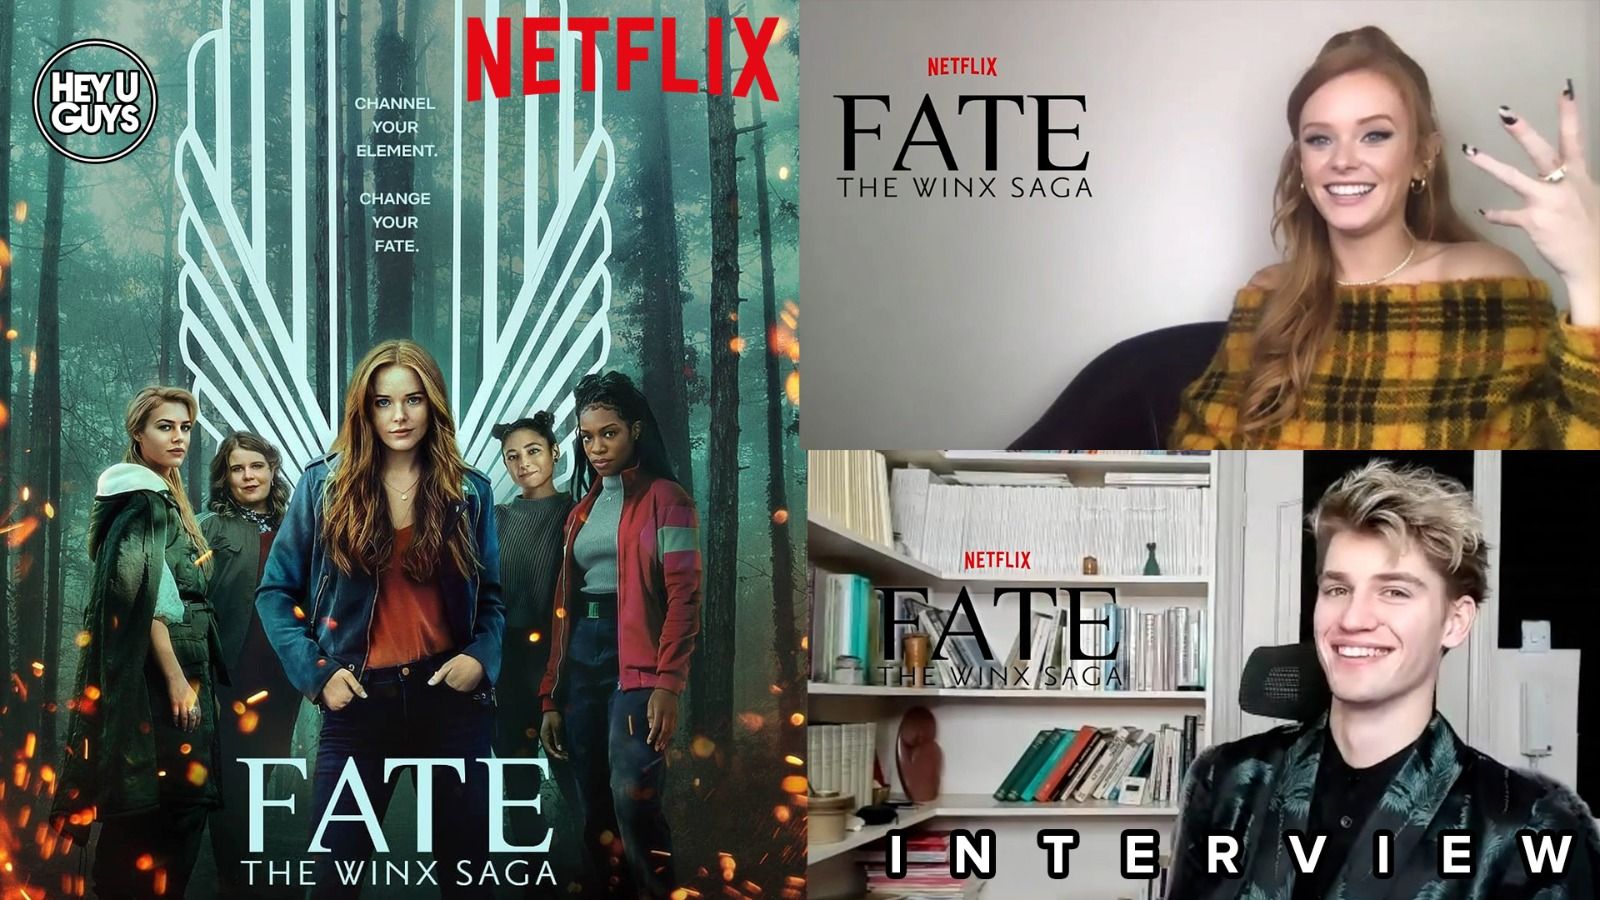 The Leading Cast Members Of Netflix 's Fate: The Winx Saga